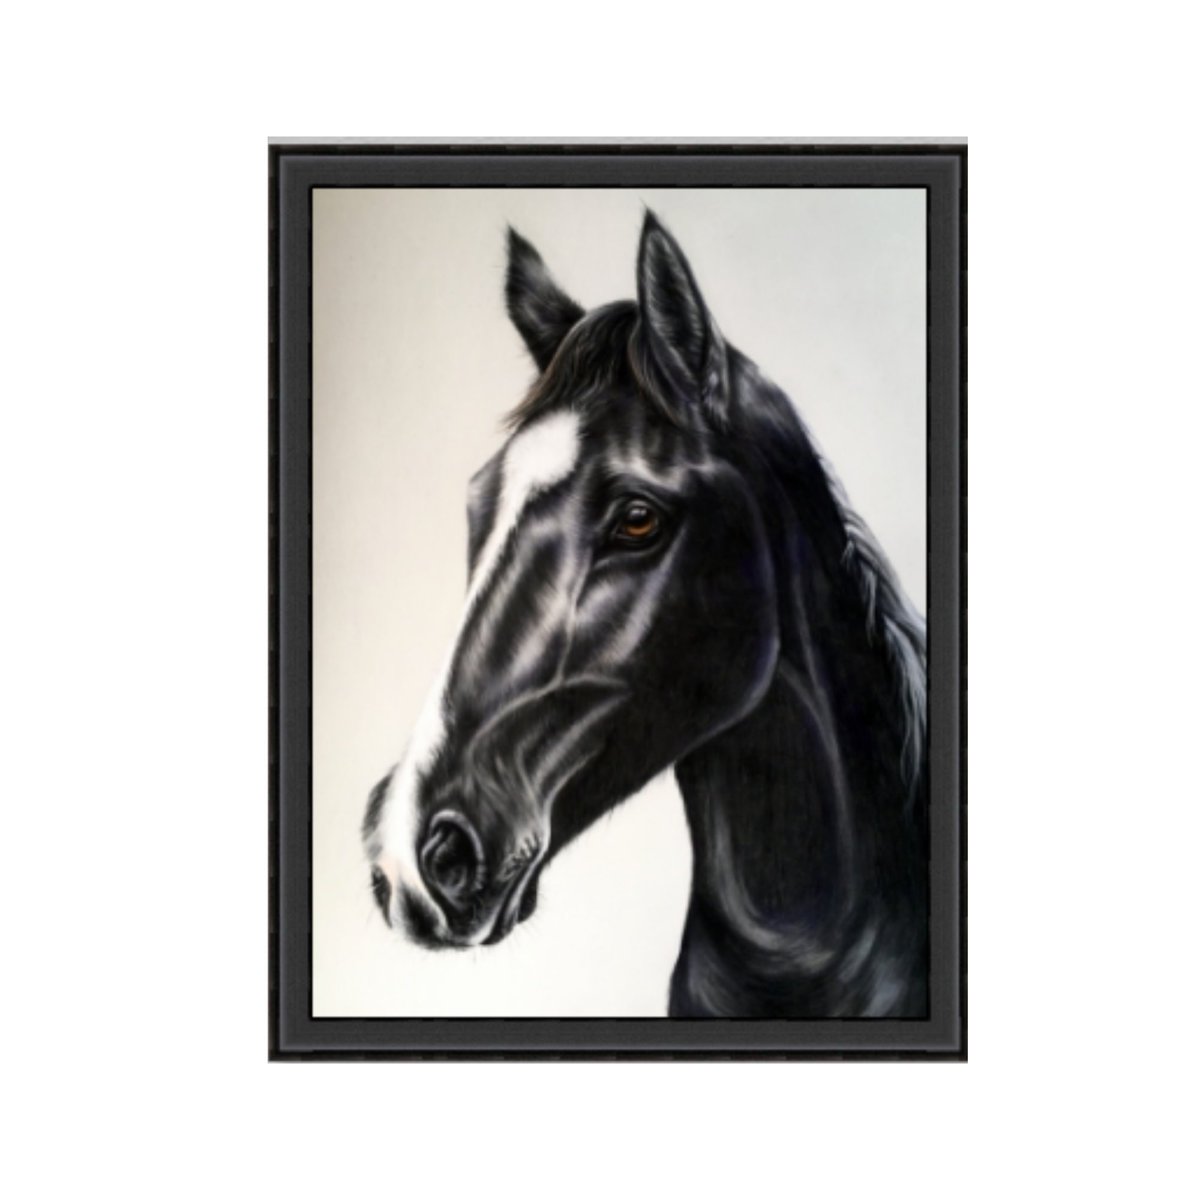 Hello Thursday and H for horse! if you know someone who likes horses we have 5 A3 posters in stock at half price at jus £10 plus pp. Just ask below!! #MHHSBD #thursdaymorning #earlybiz #elevenseshour #craftbizparty #blackhorse #wallart #giftsforgirls artbythree.co.uk